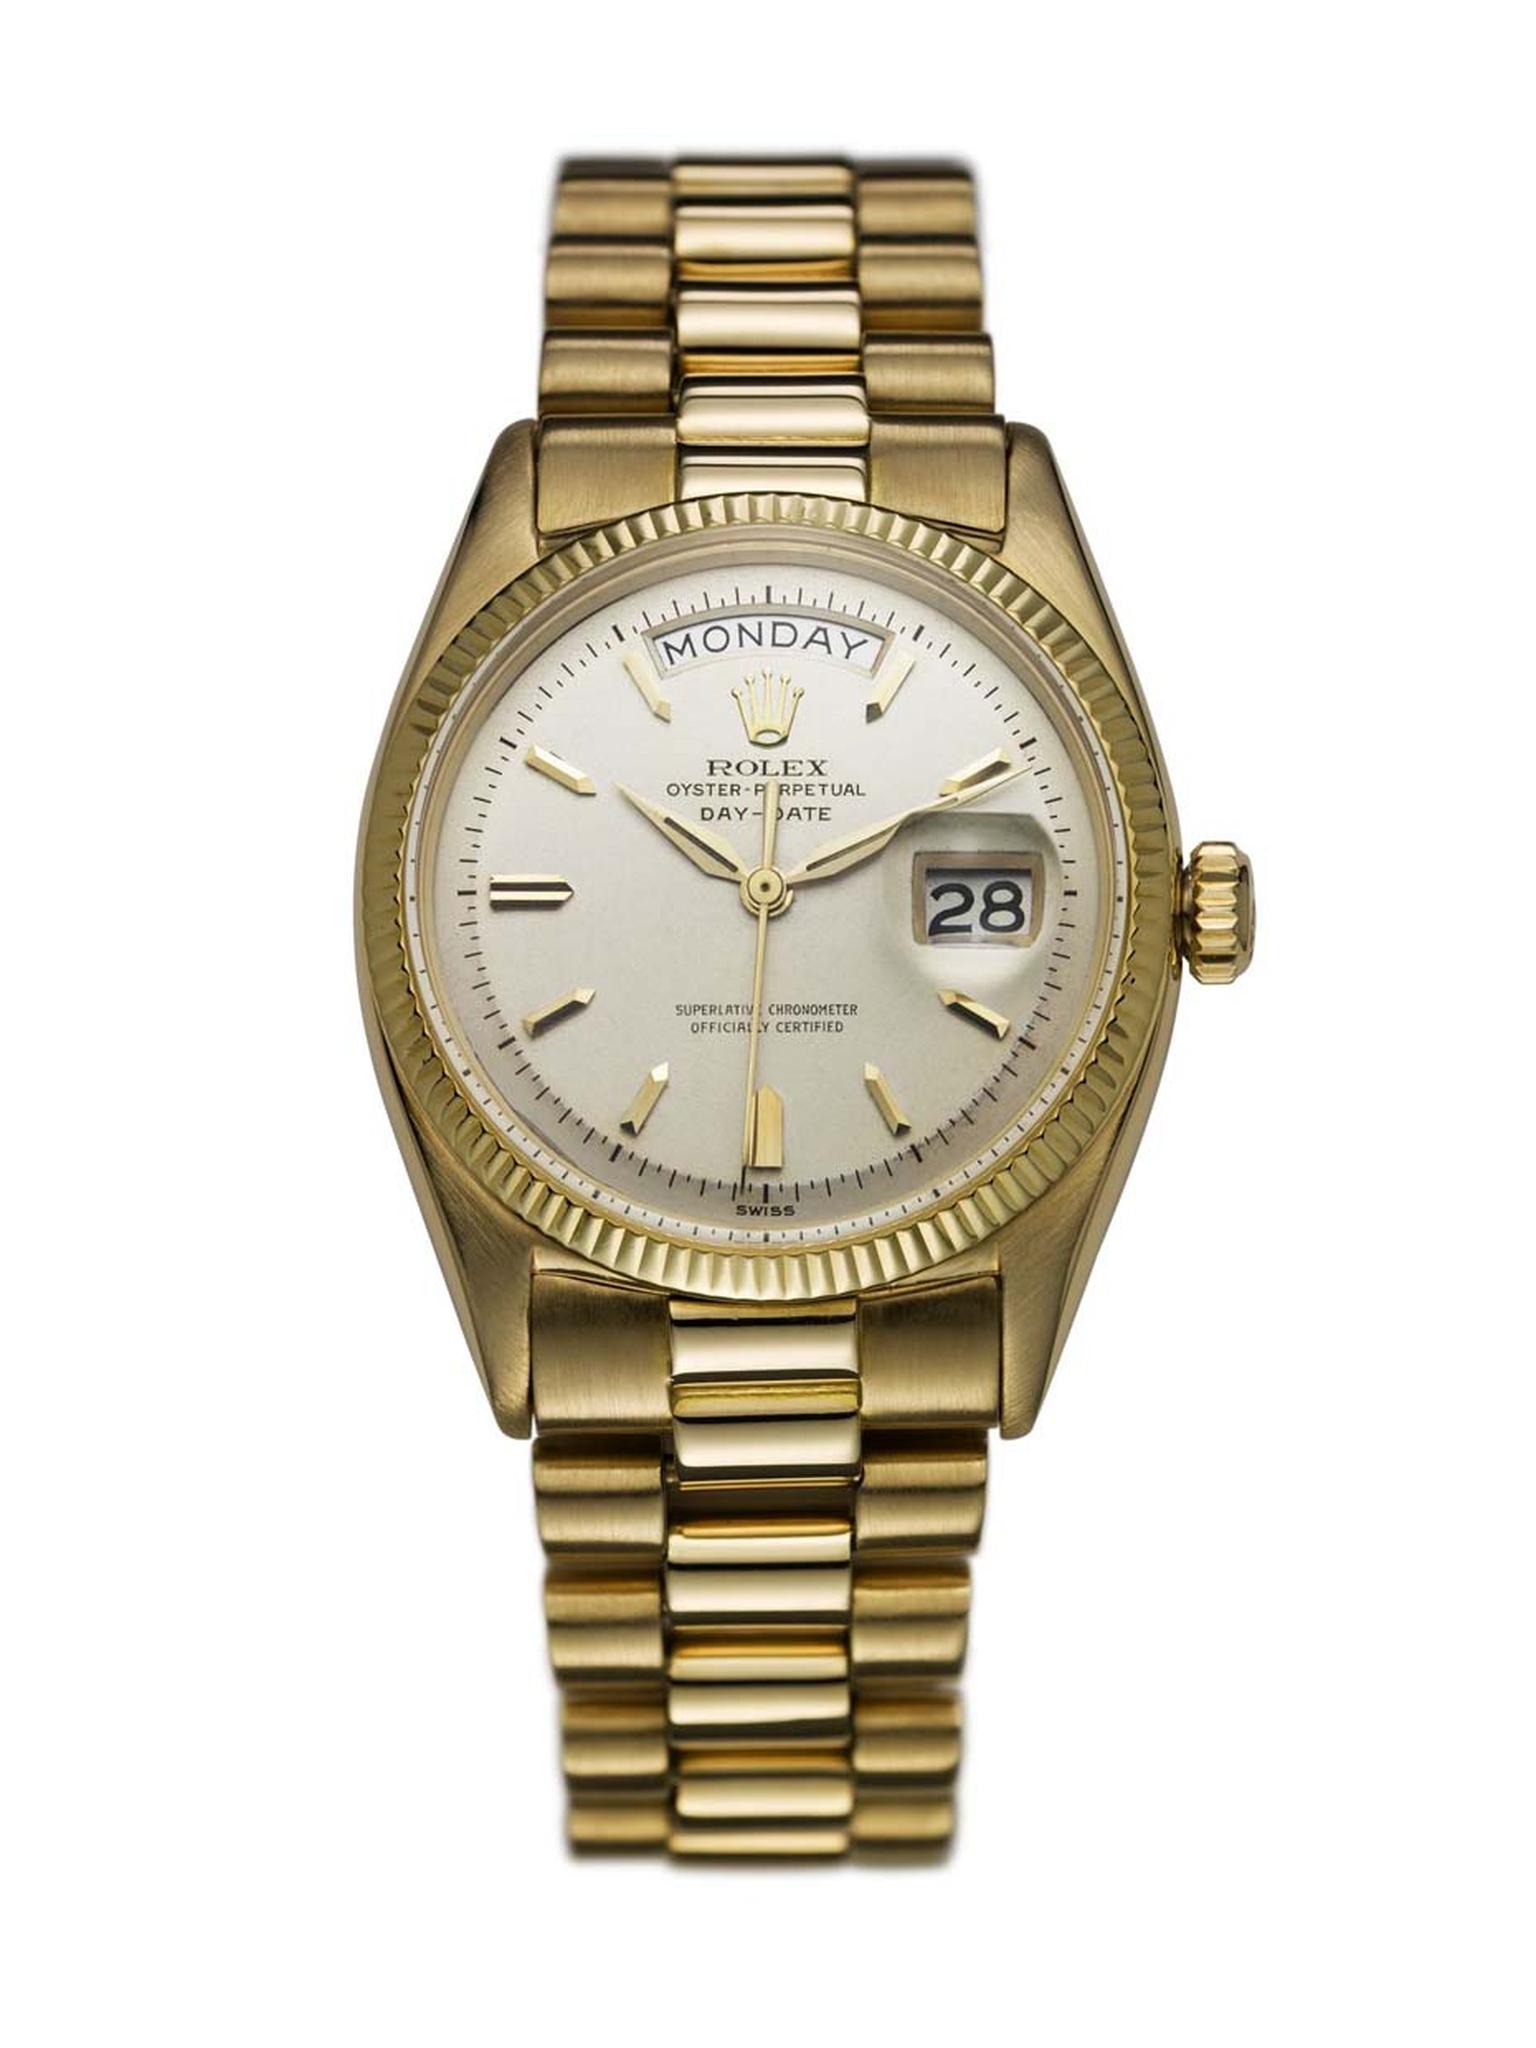 The Rolex Day-Date watch from 1956 was the first watch to display the date and the day of the week spelt out in full in a window at the top of the dial.